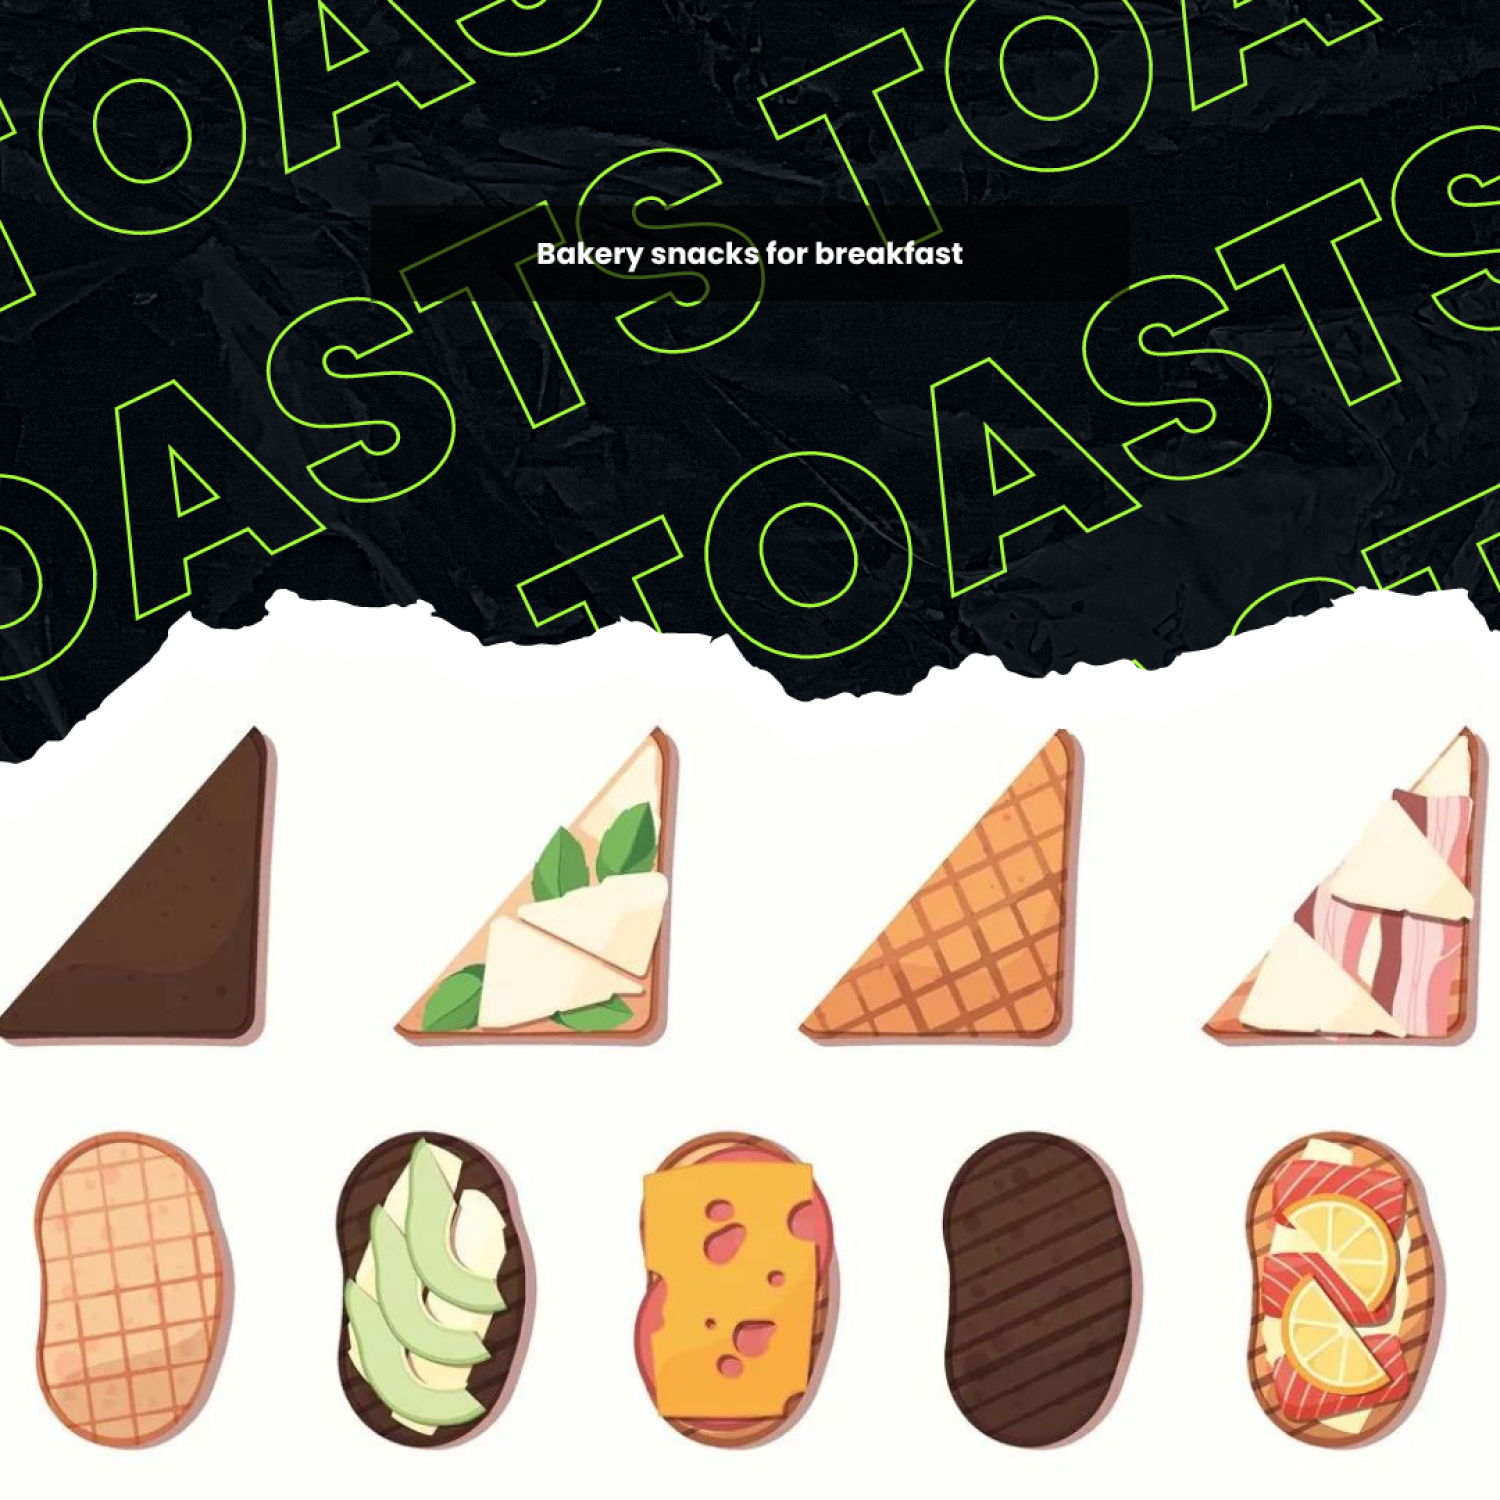 Prints of toasts images.